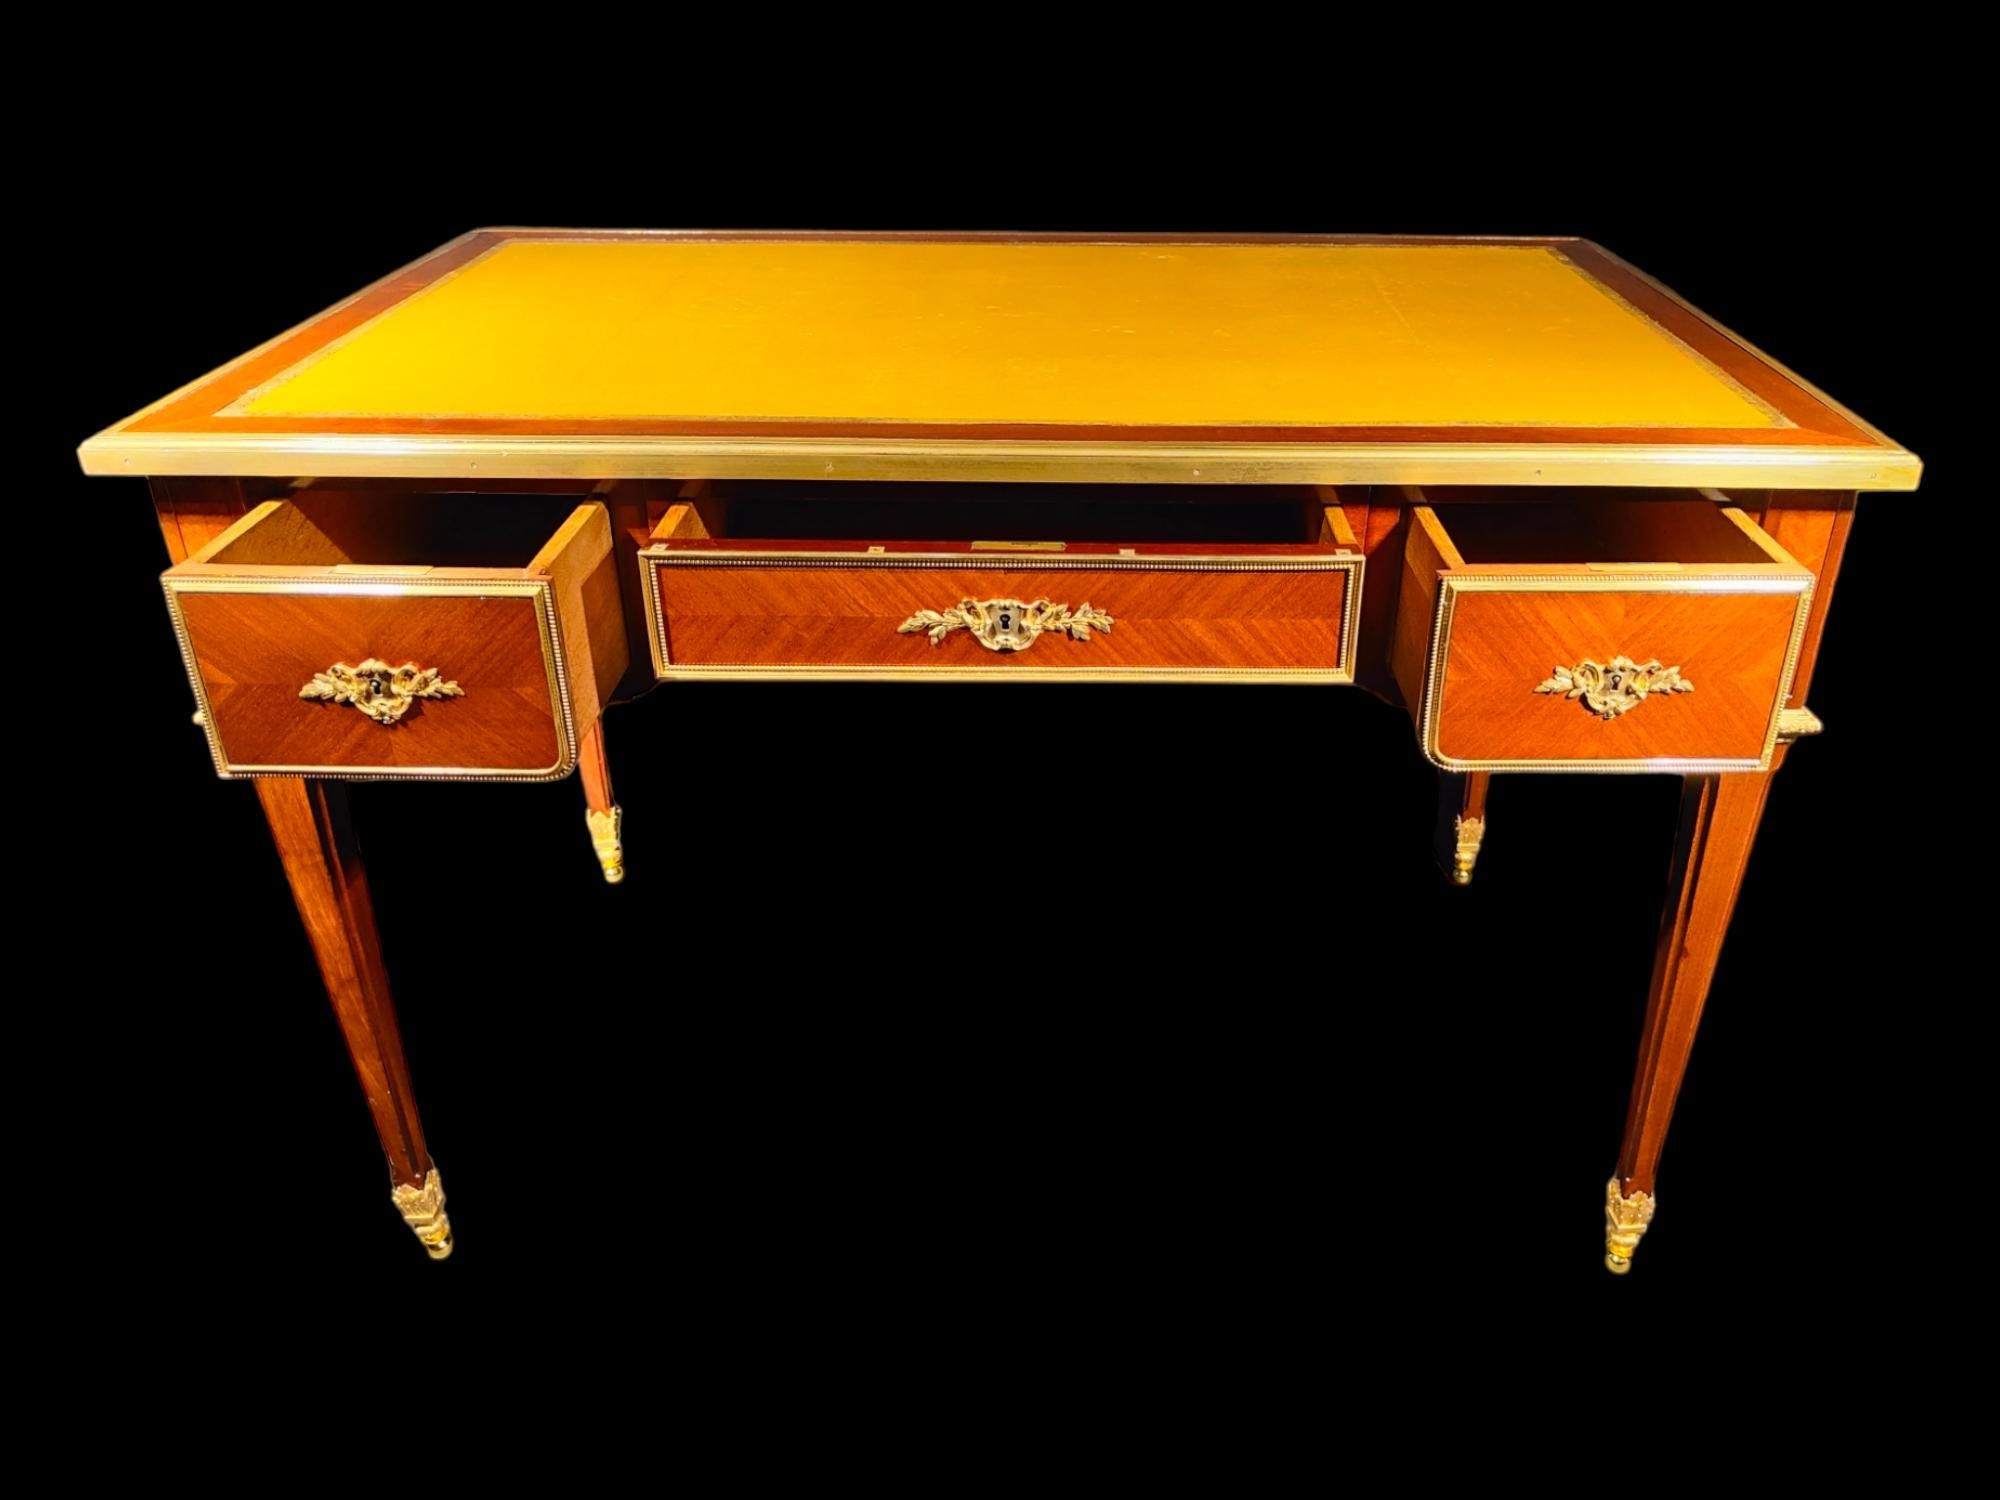 Very Fine Gilt Bronze Mounted Tulipwood and Amaranth Desk by L. Cueunieres For Sale 7